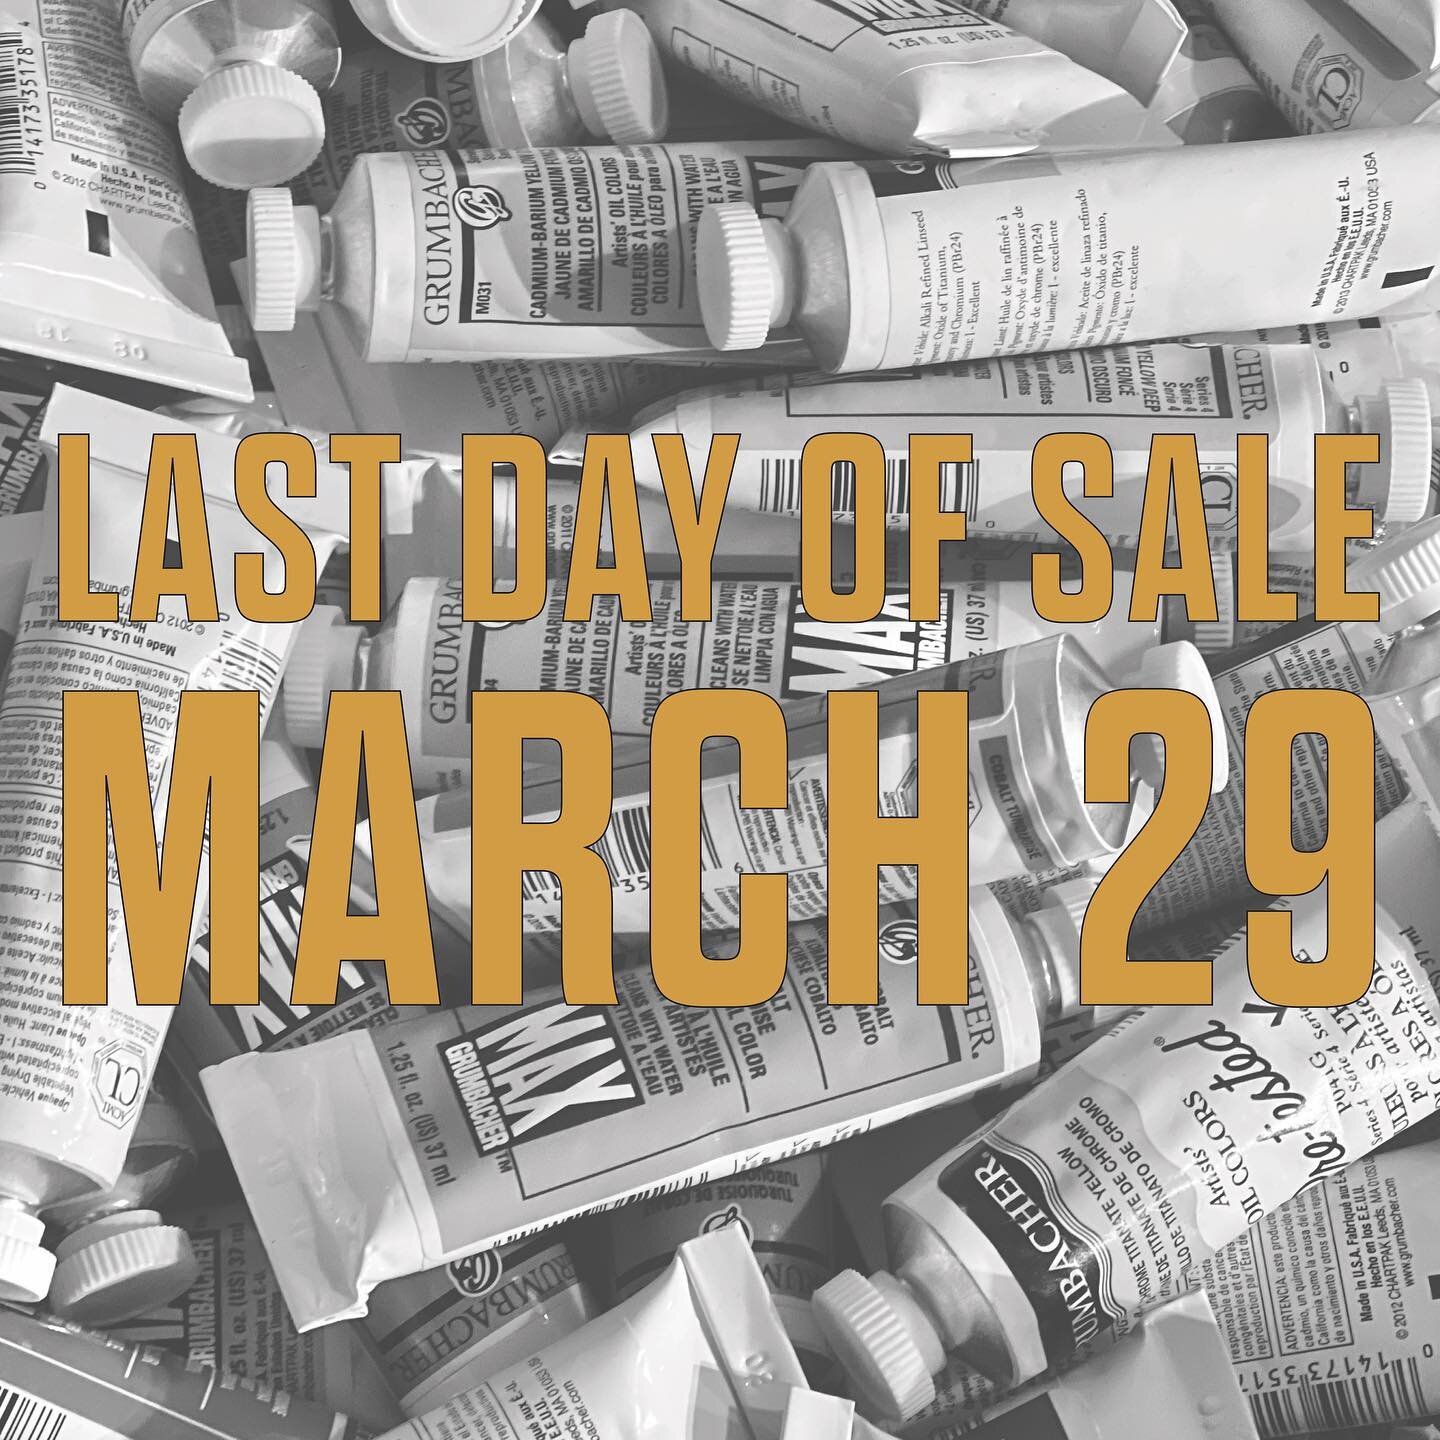 Our warehouse sale is coming to an end.  March 29 is the last day to shop discounted items at 7 Wooster St.
.
.
.
#sohoartmaterials #warehousesale #artsupplies #artsupplysale #sohoart #nycartists #independentretailer #sale